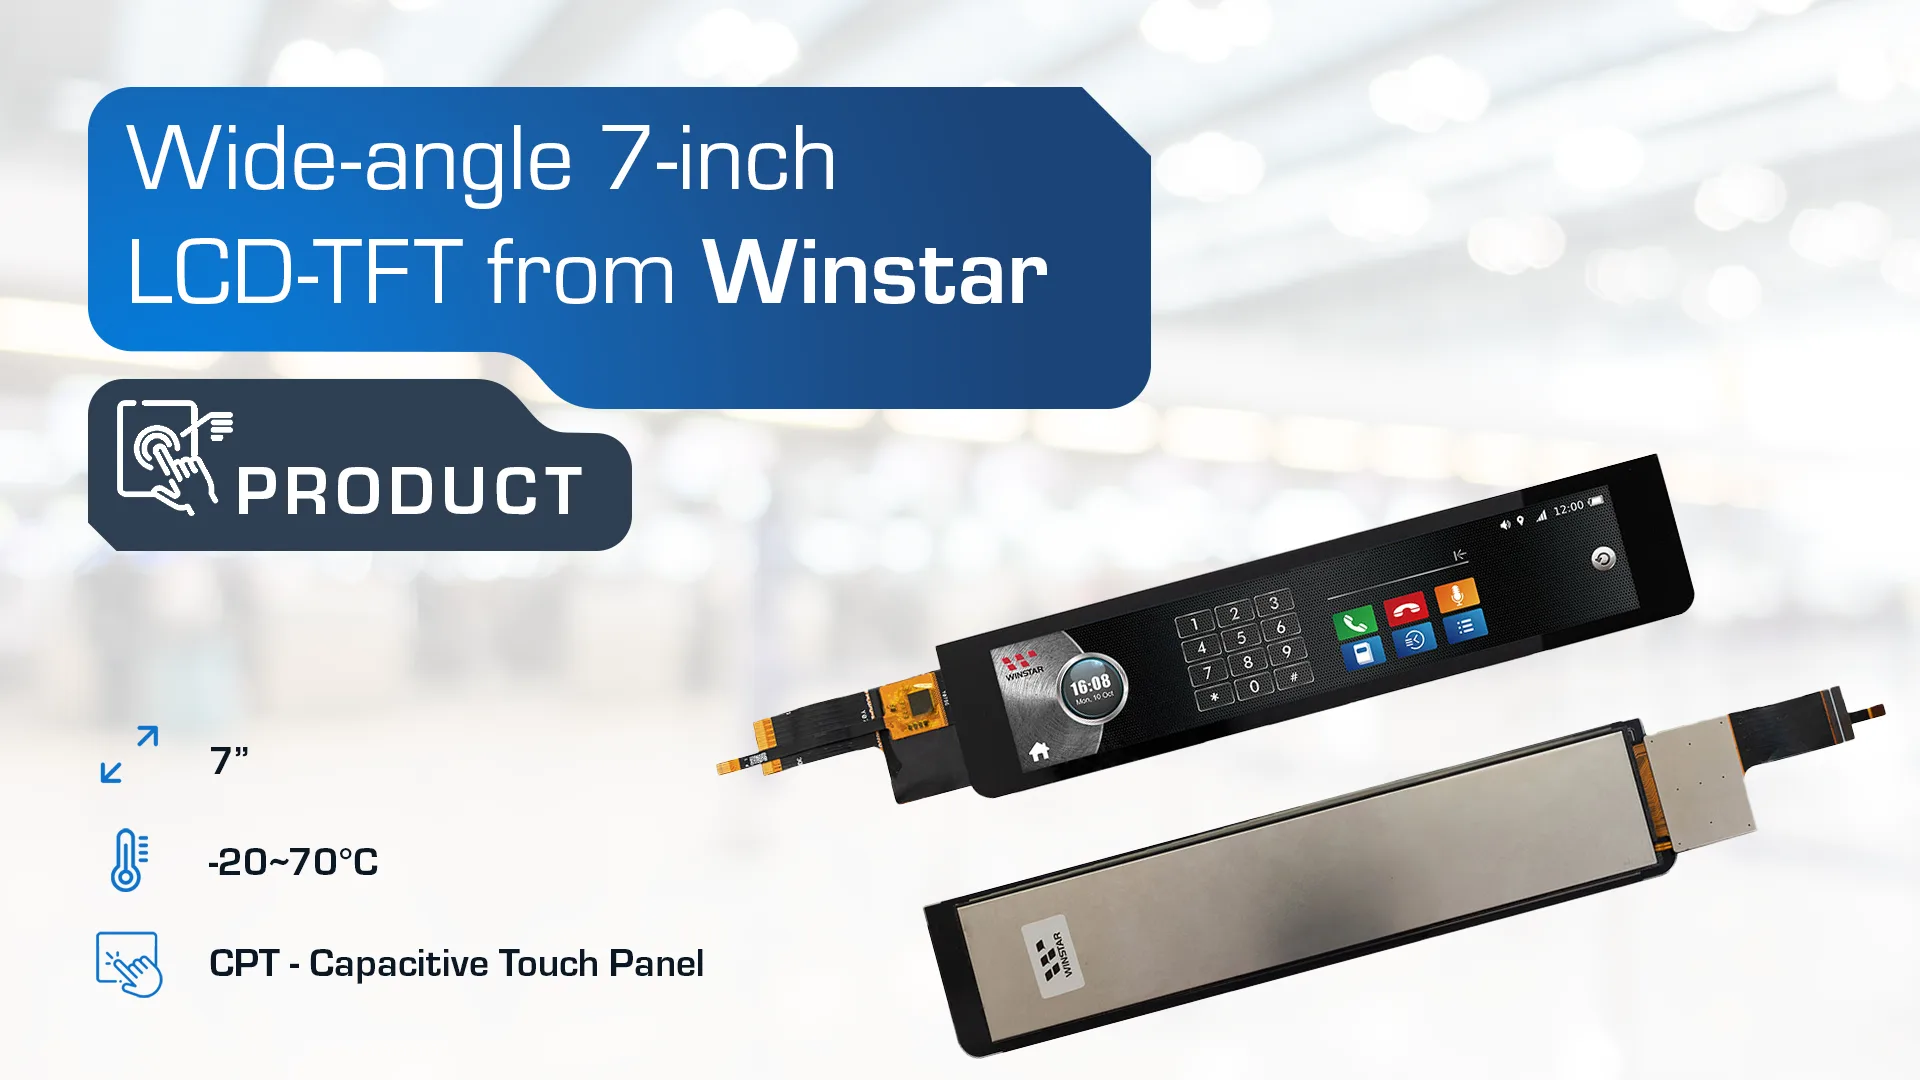 Wide-angle 7-inch LCD-TFT from Winstar